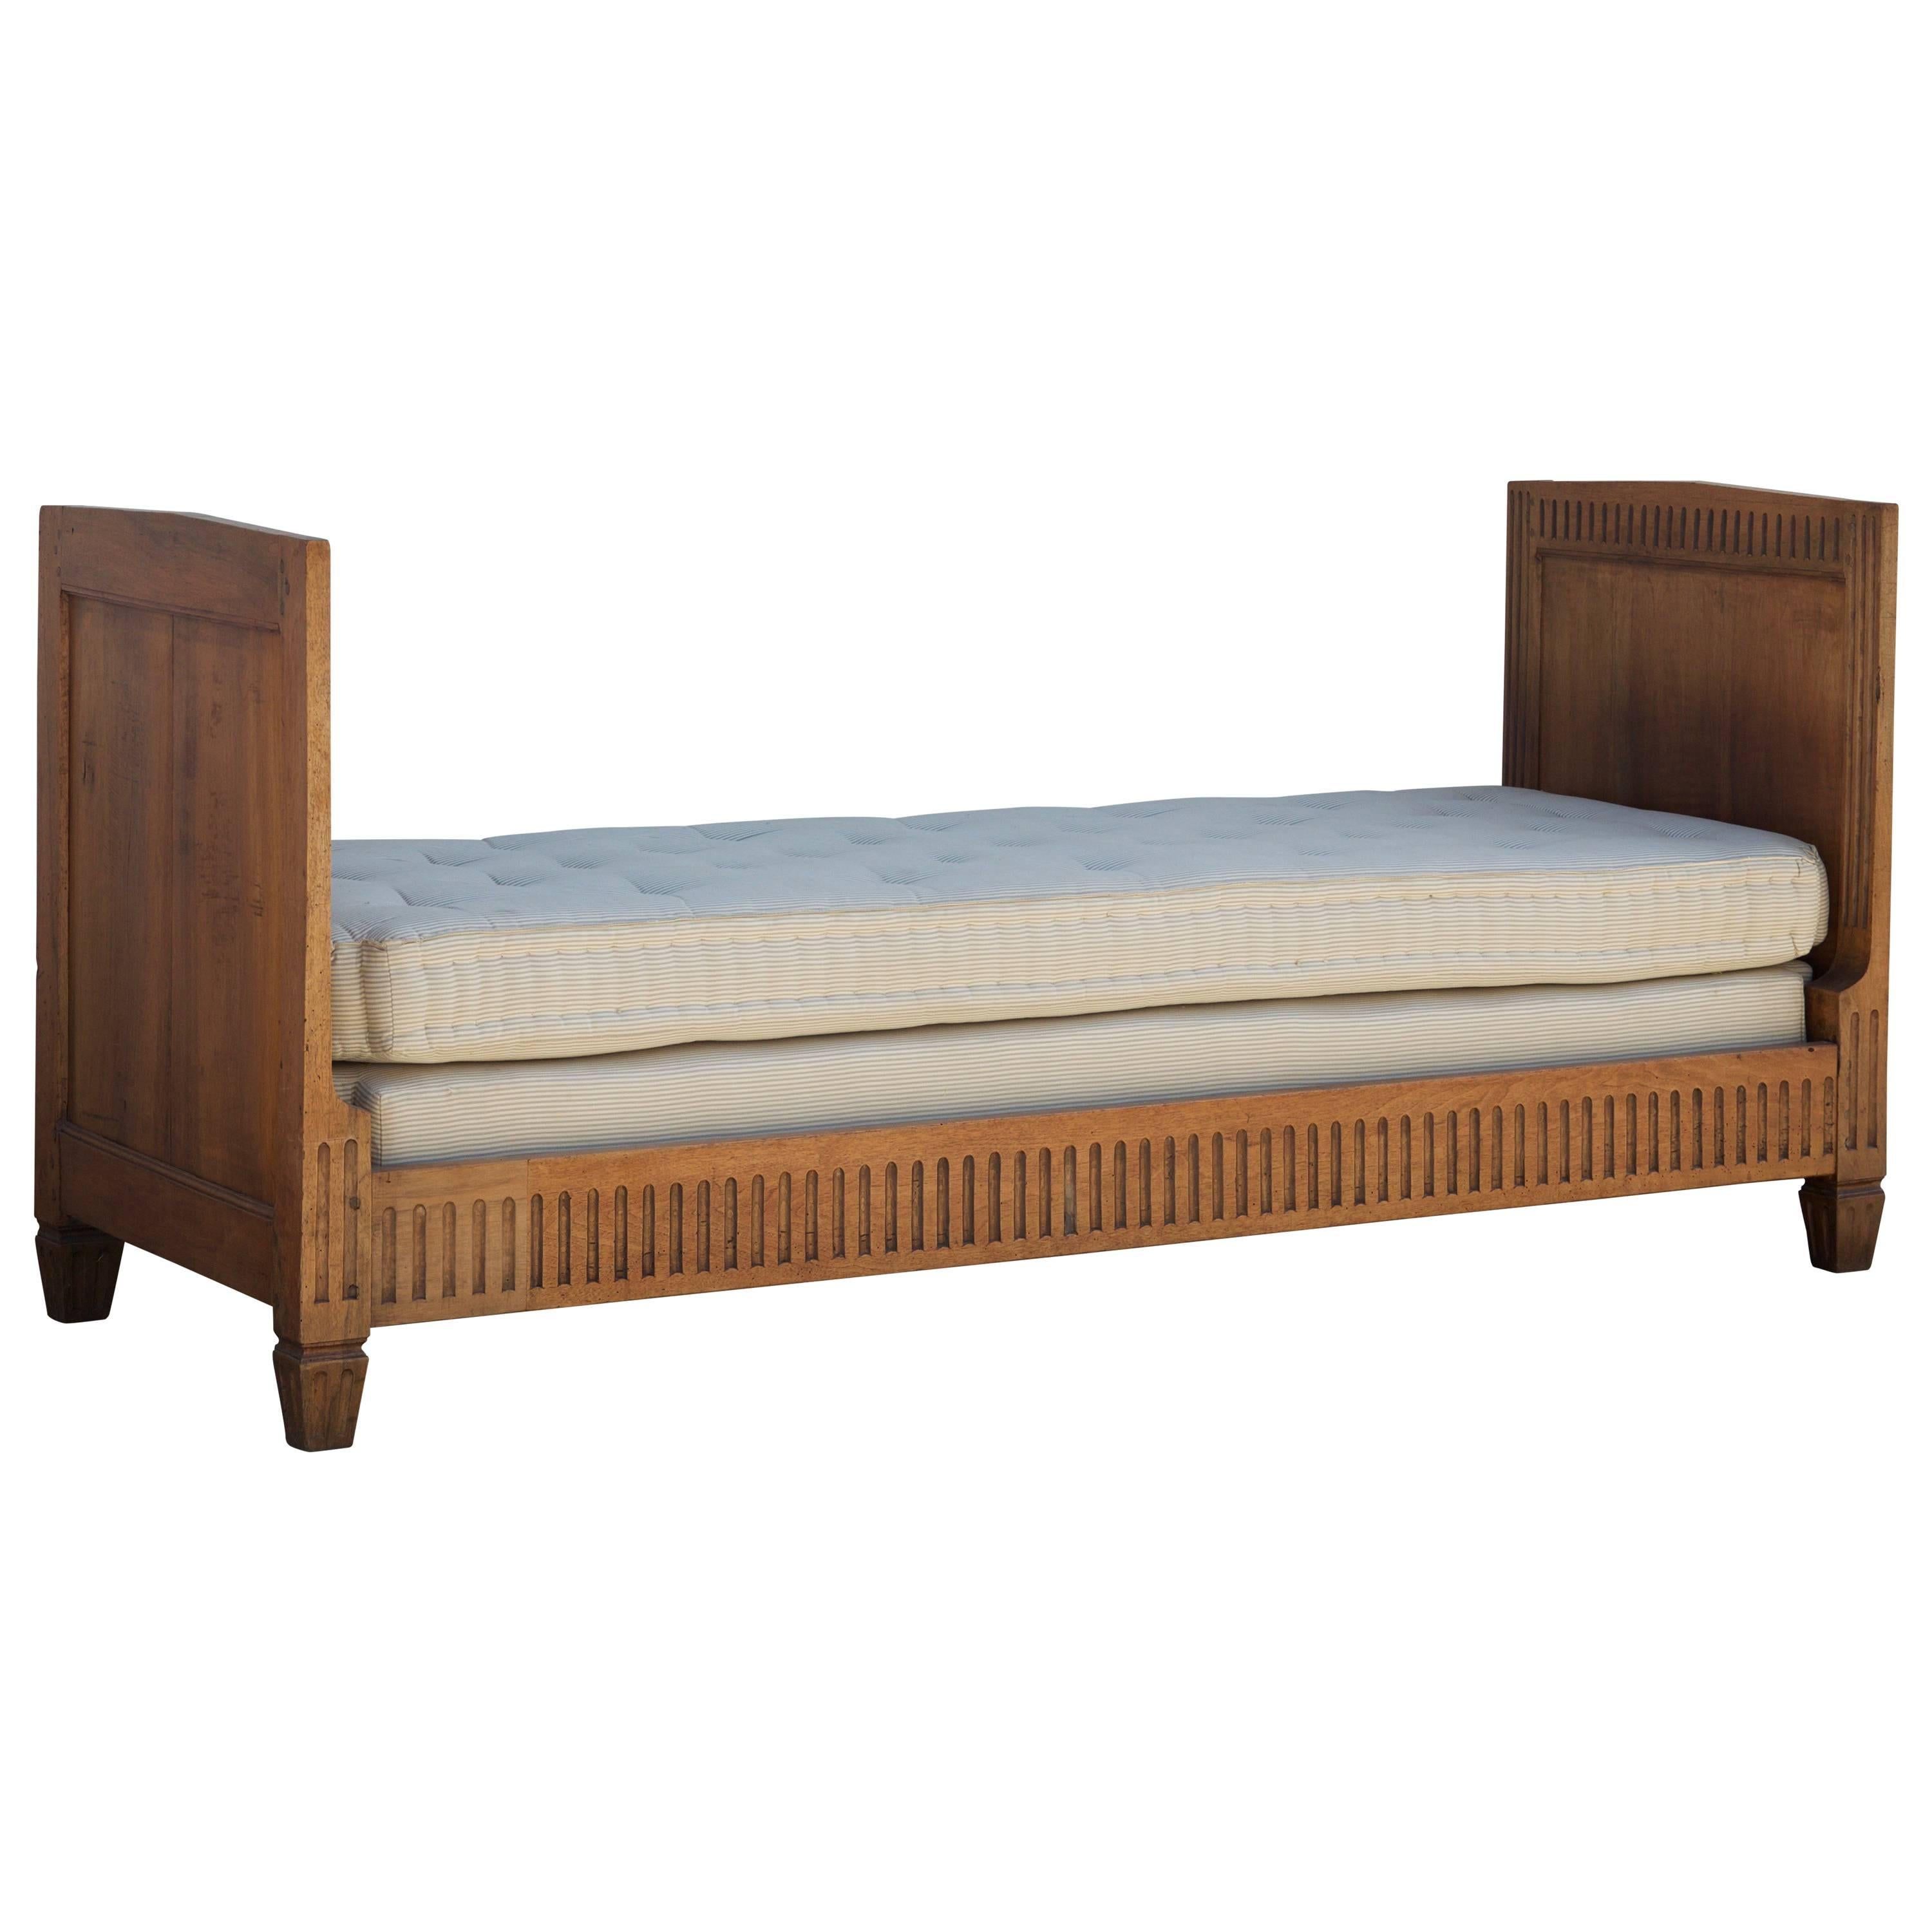 Chic French Louis XVI Style Neoclassical Daybed